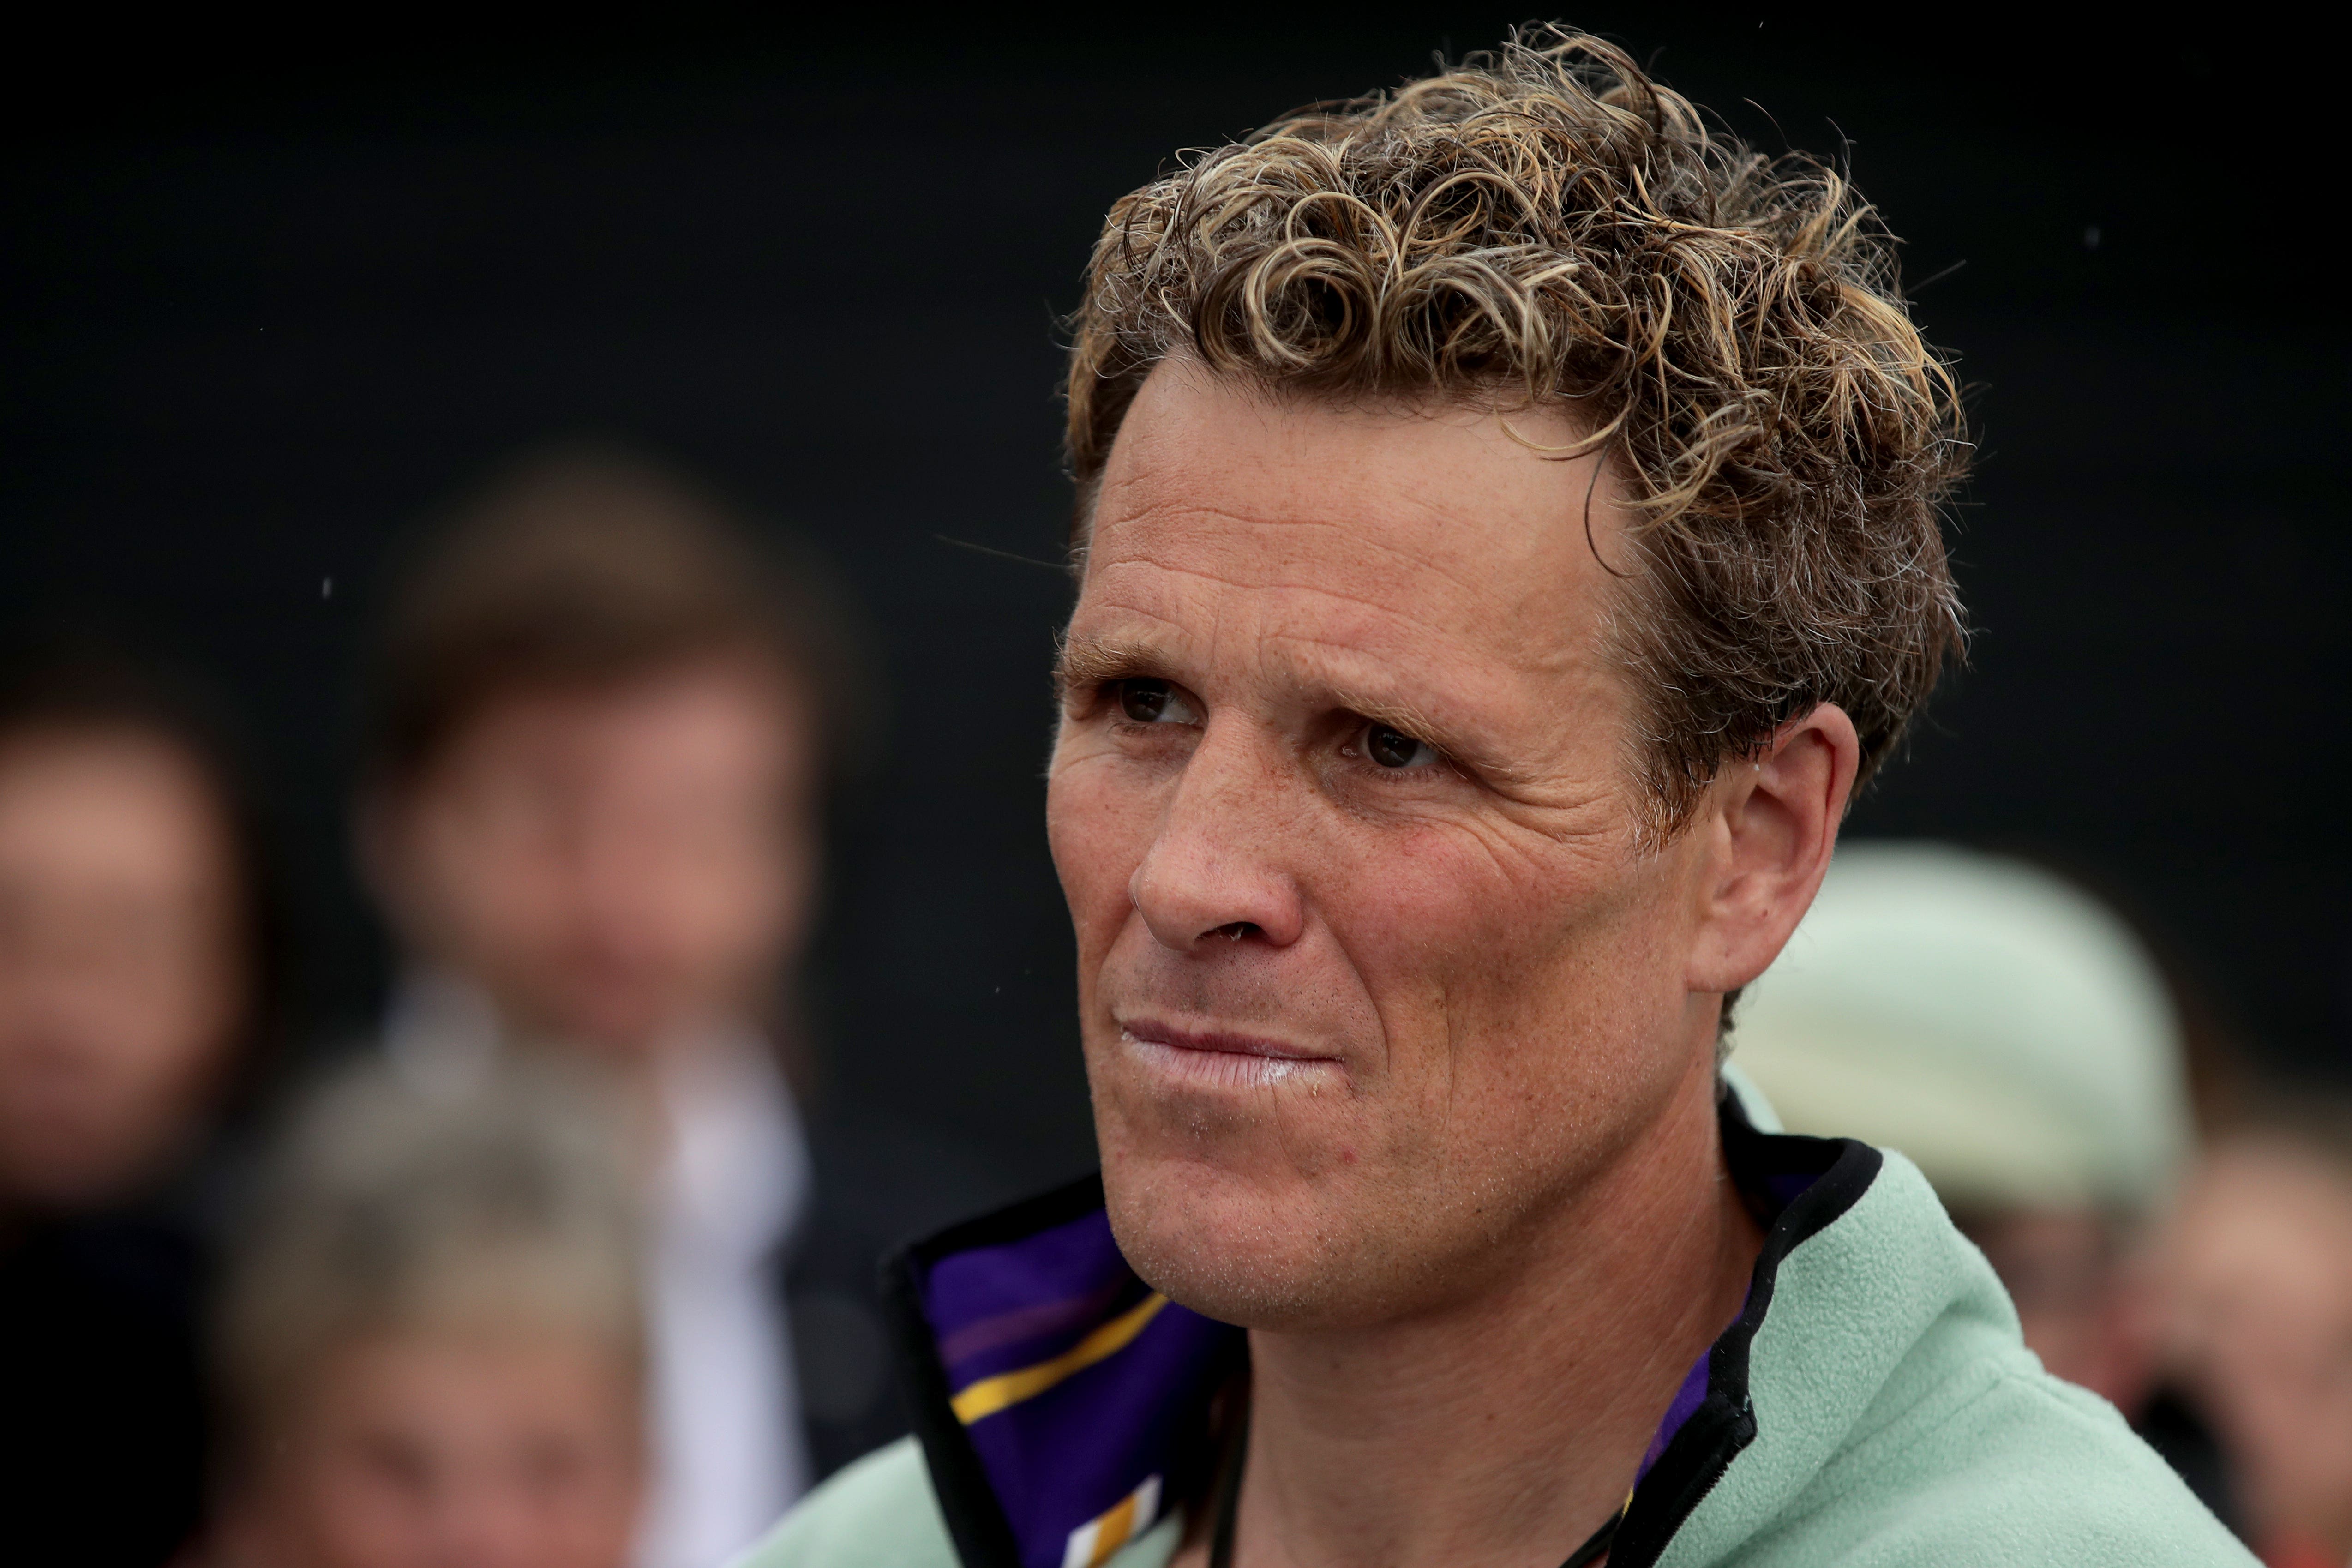 Olympic medallist James Cracknell will be the Tory candidate in Colchester